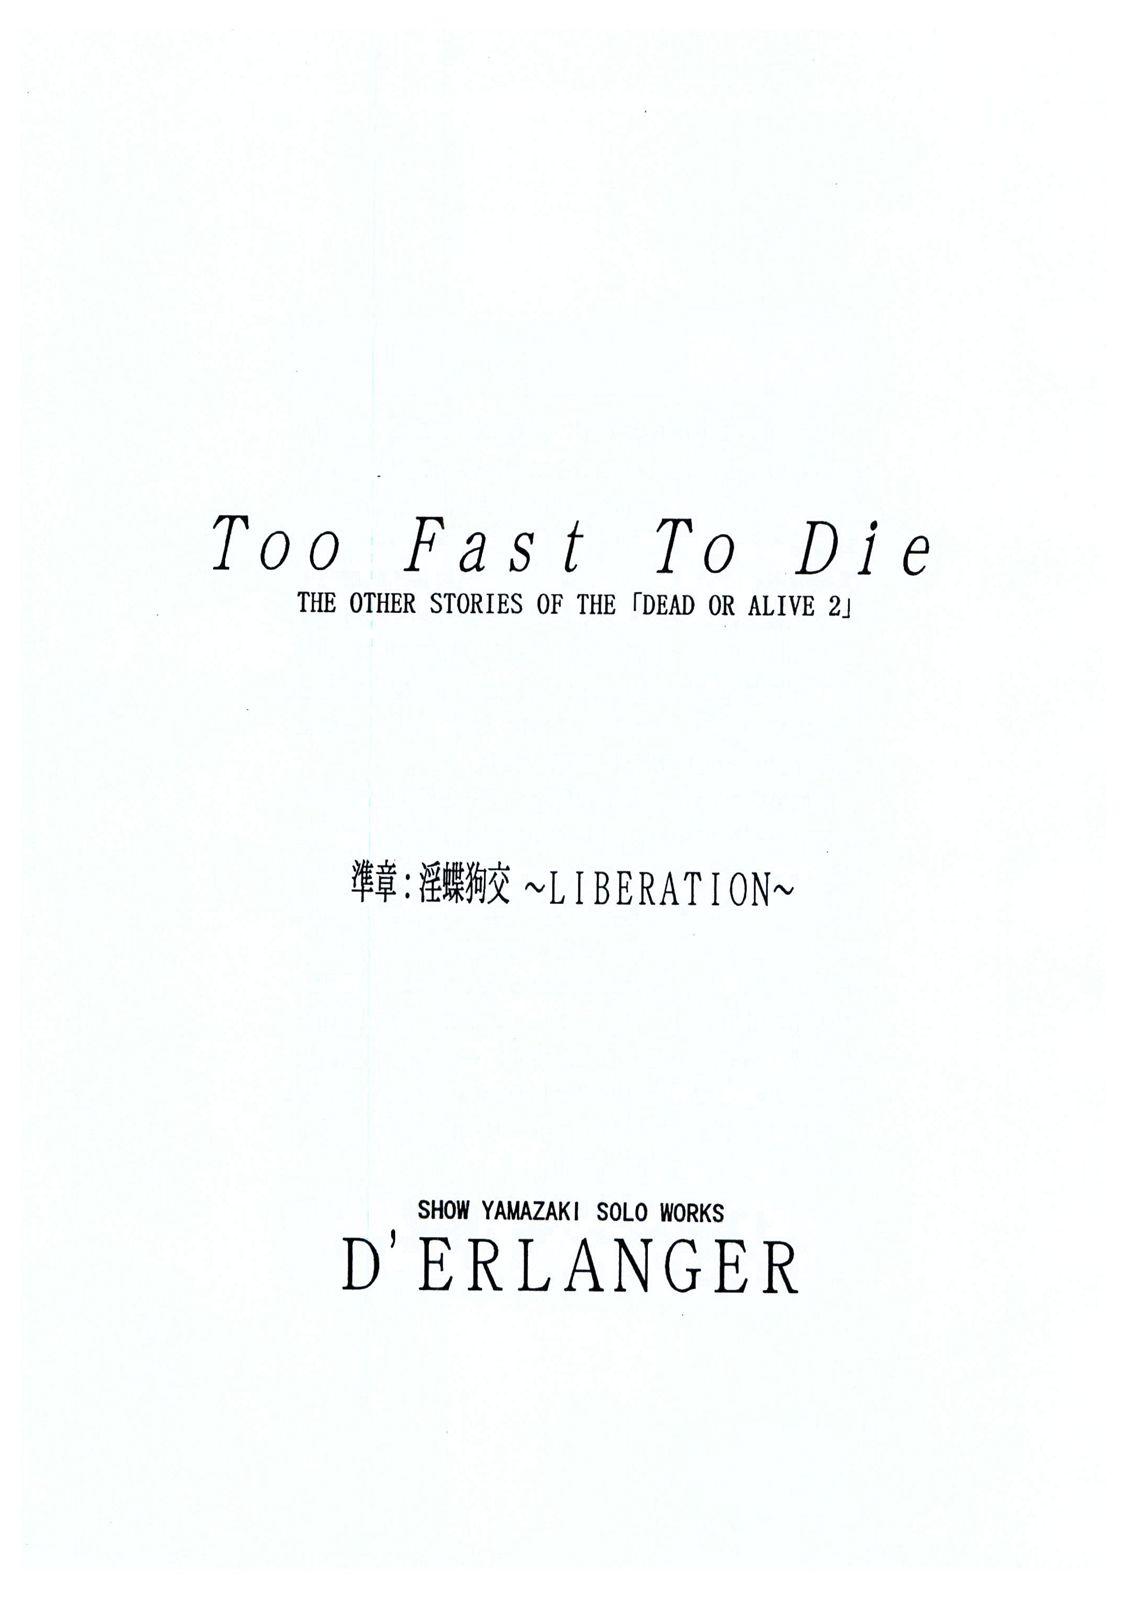 Fuck Too Fast To Die - Dead or alive Gaping - Page 3